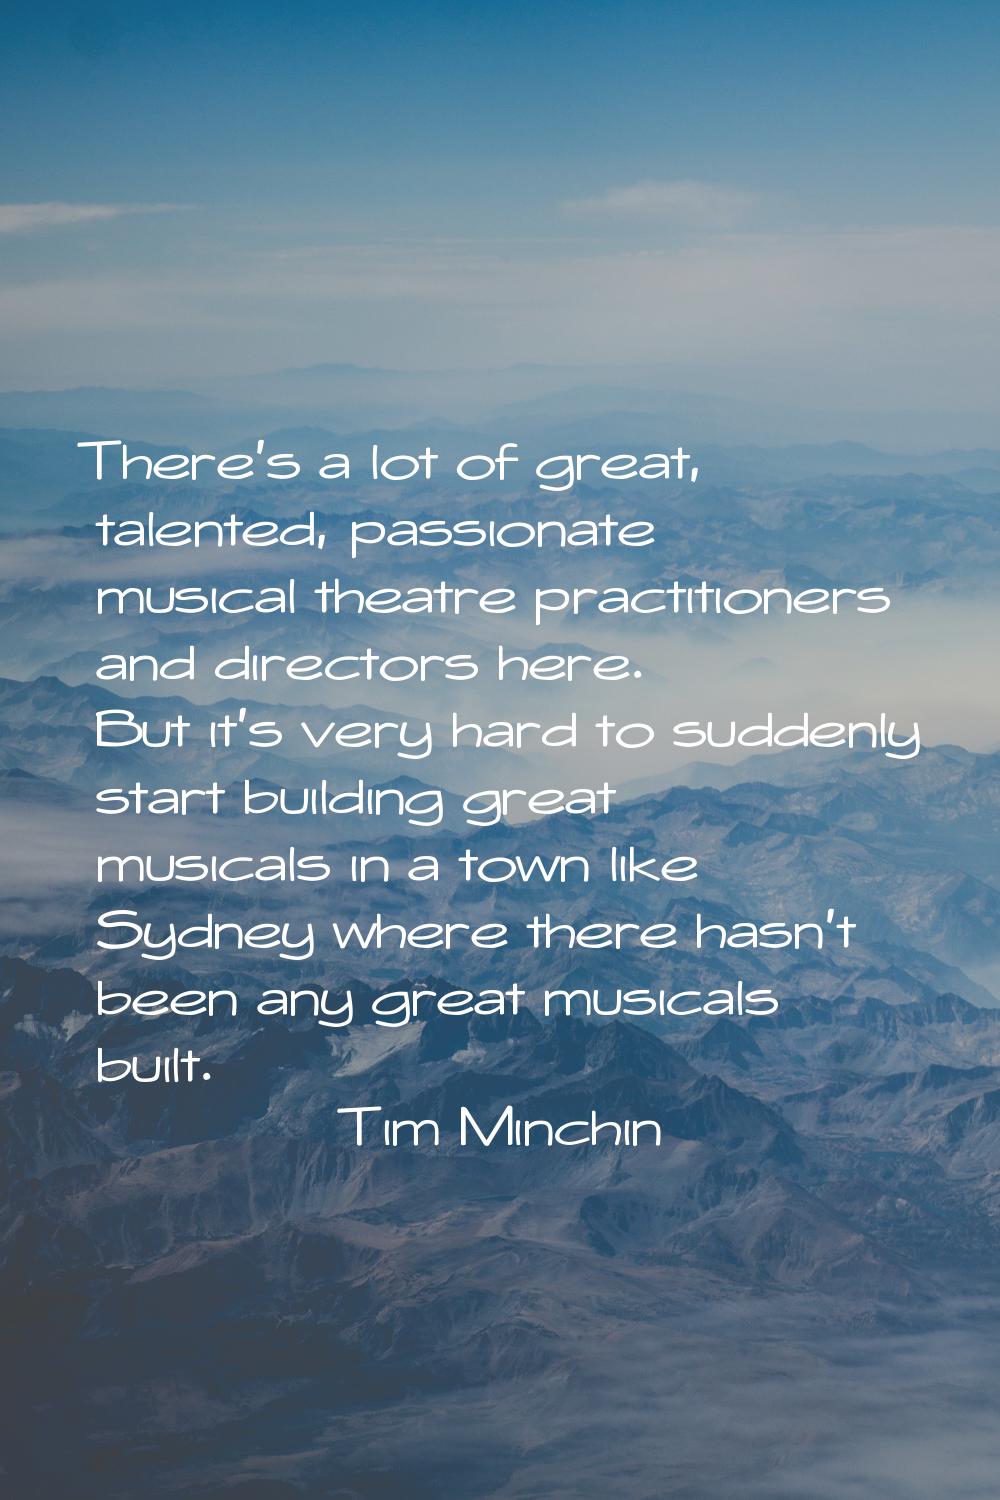 There's a lot of great, talented, passionate musical theatre practitioners and directors here. But 